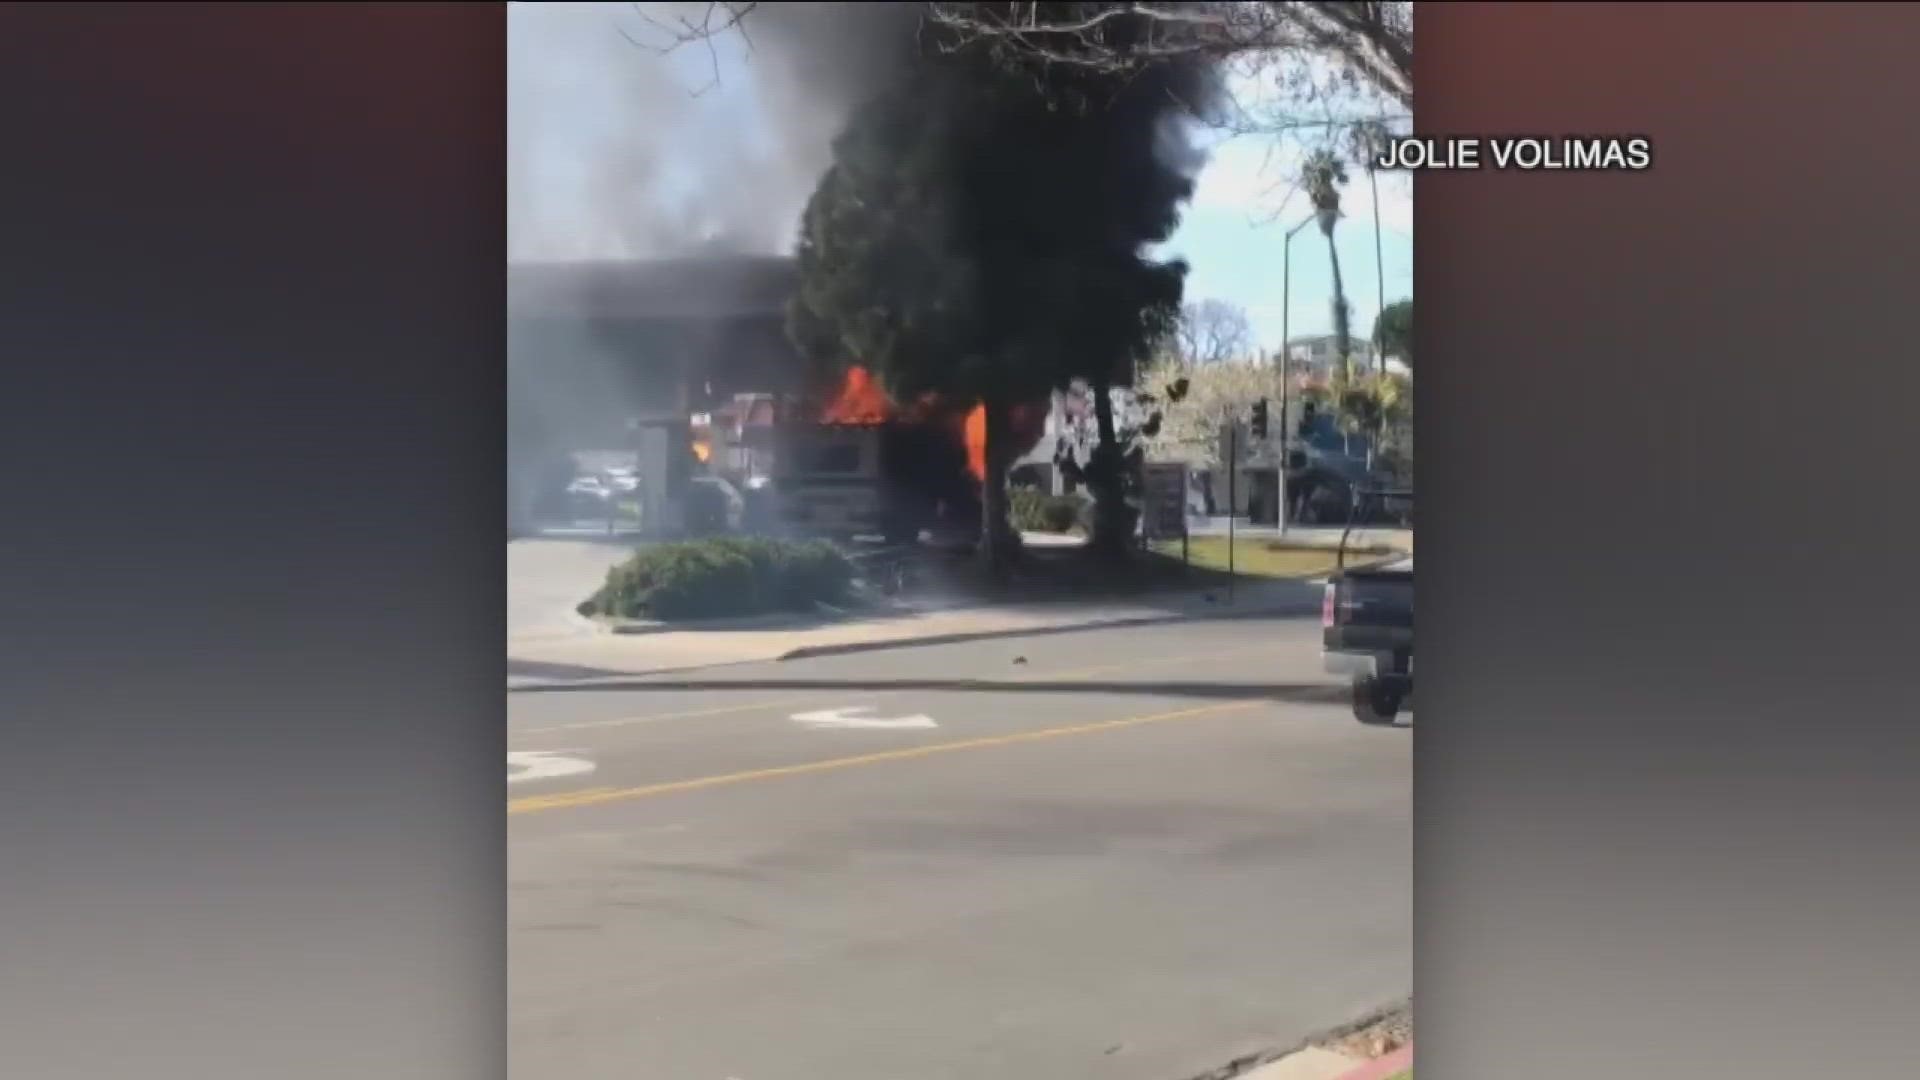 Authorities are investigating what led to an RV allegedly exploding and catching fire at a La Mesa gas station, leaving two people with burn injuries.